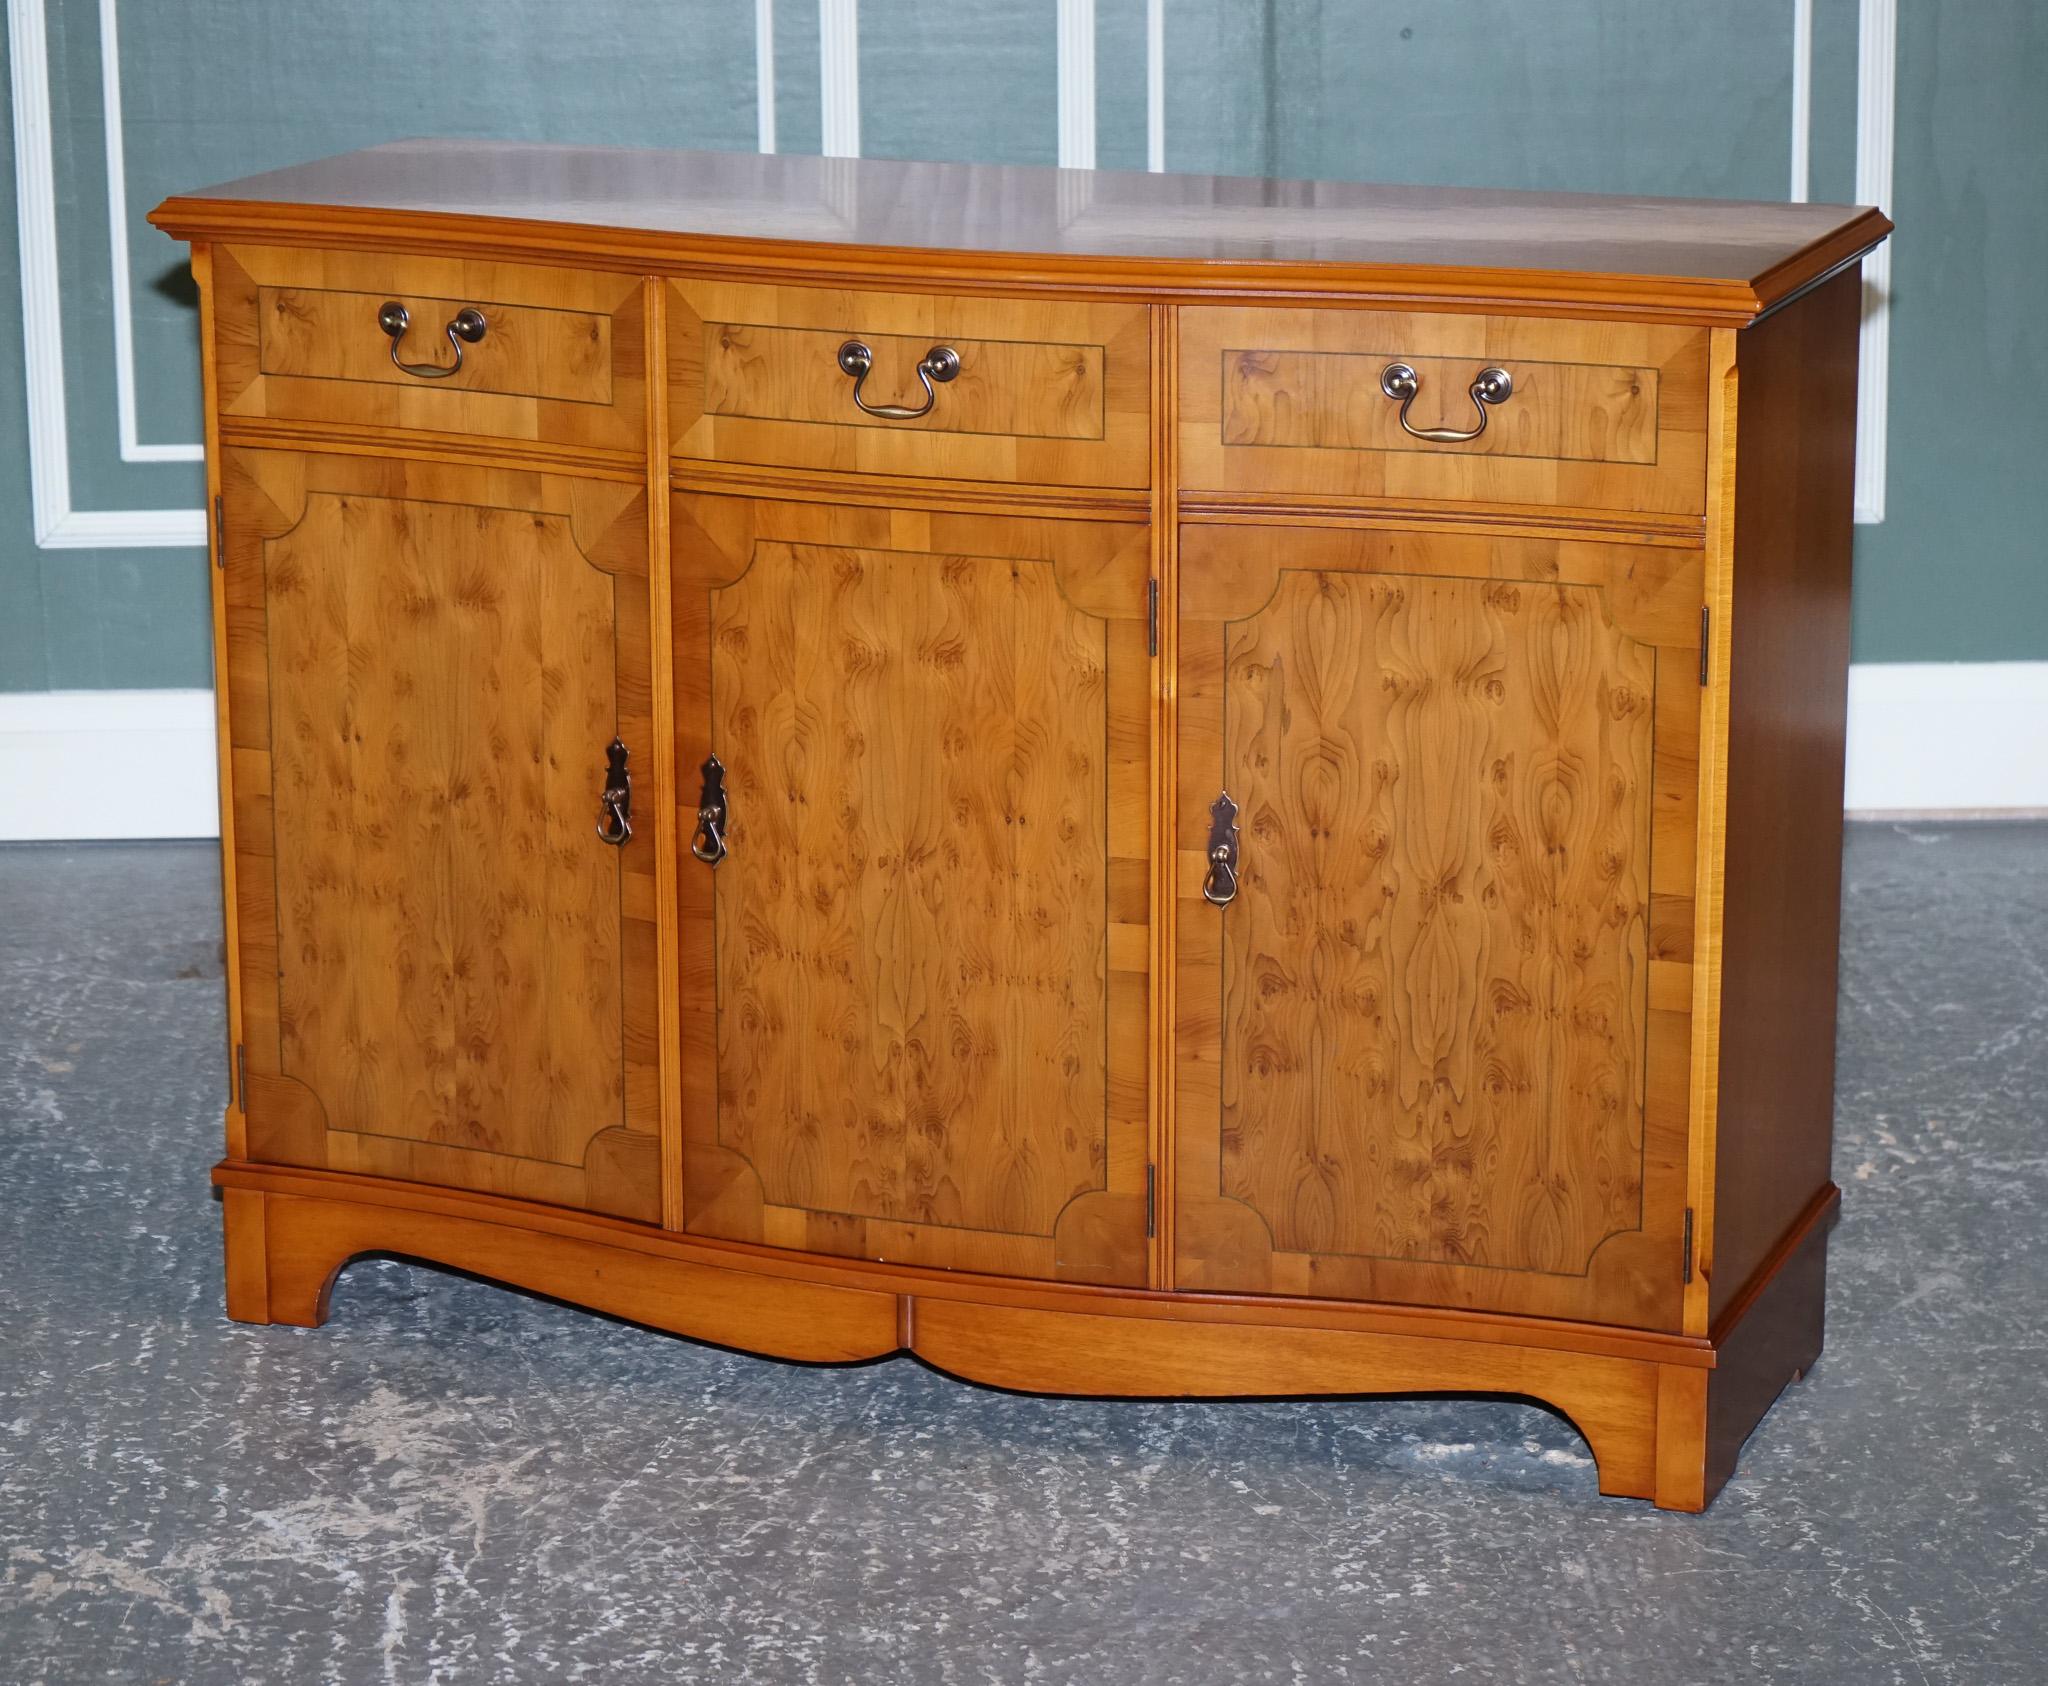 
We are delighted to Present This Lovely Vintage Burr Yew Wood Bow Front Sideboard.

A very well-made and solid sideboard, made from yew and burr yew wood.
It has been made by Strongbow furniture, It serves three drawers and three cupboards with